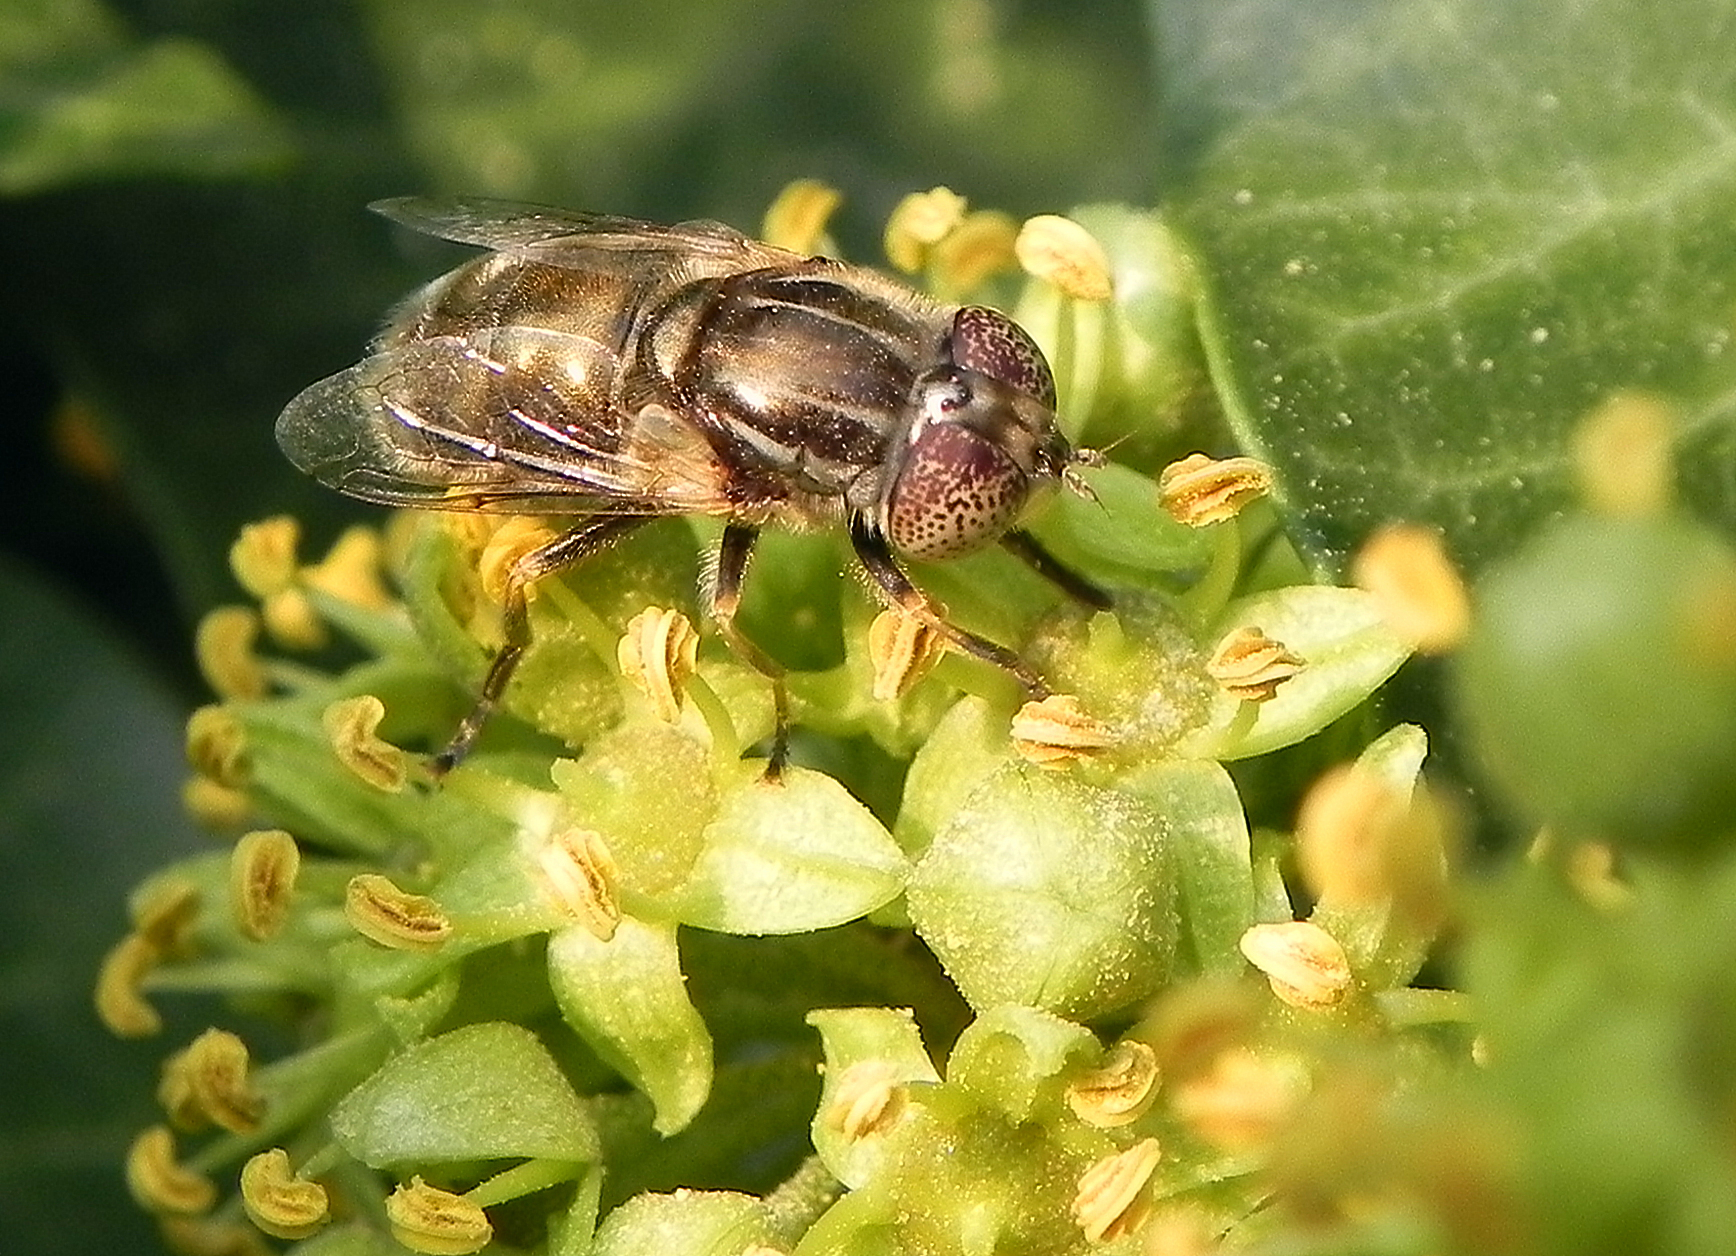 Fam. Syrphidae, Italia, Brescia, 8 Sep 2014. Provided by Paolo to children for didactics, but not shot with them.